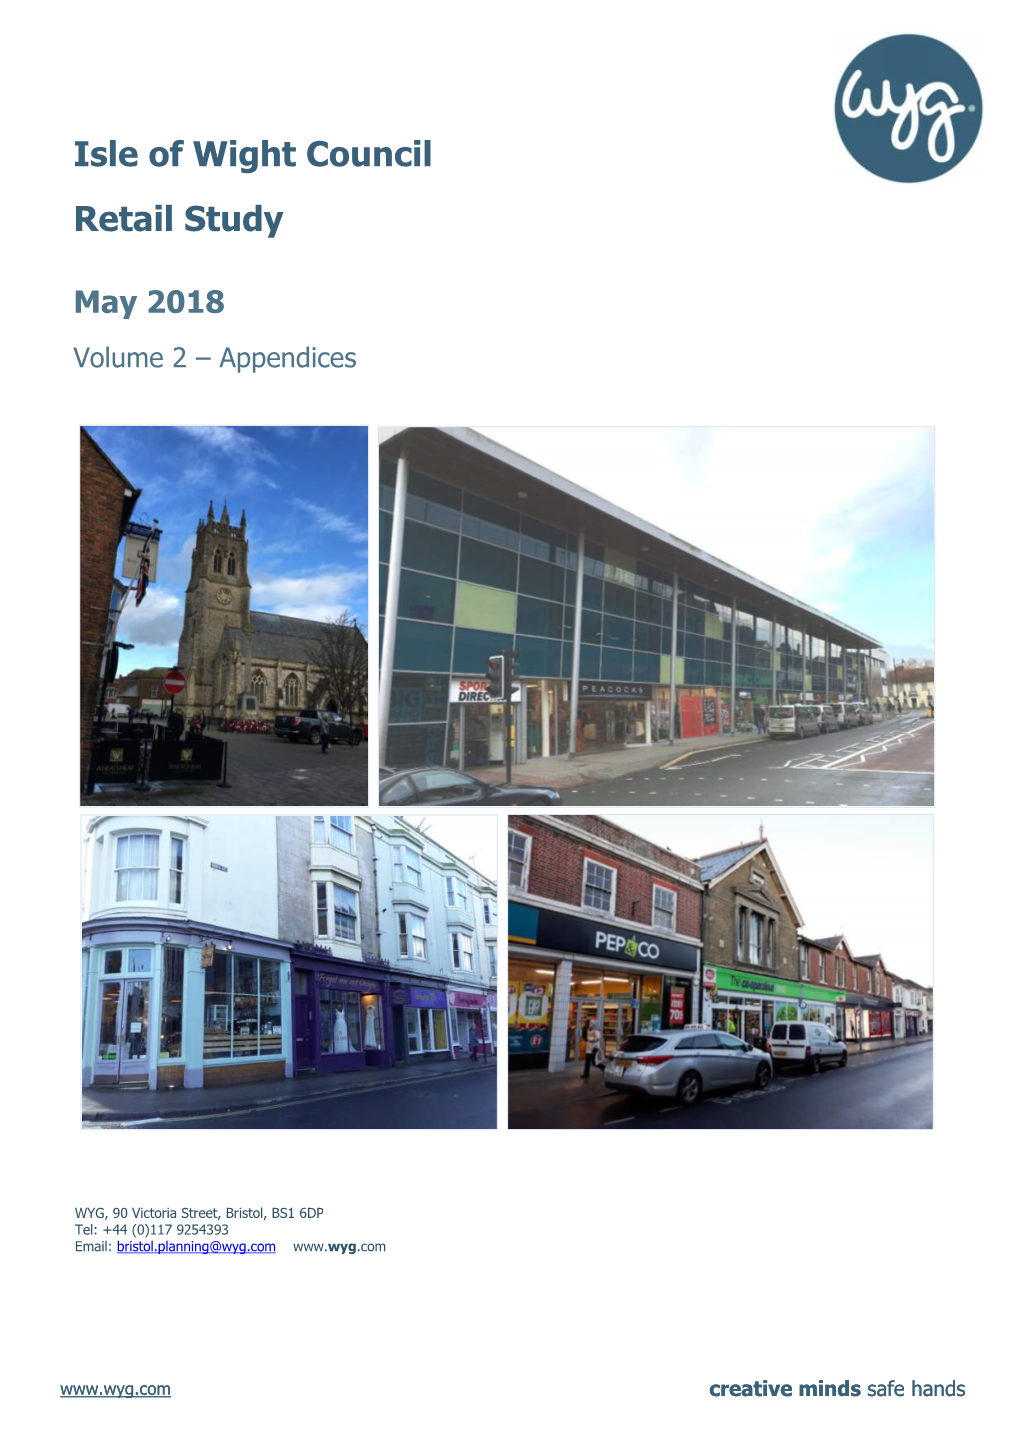 Isle of Wight Council Retail Study